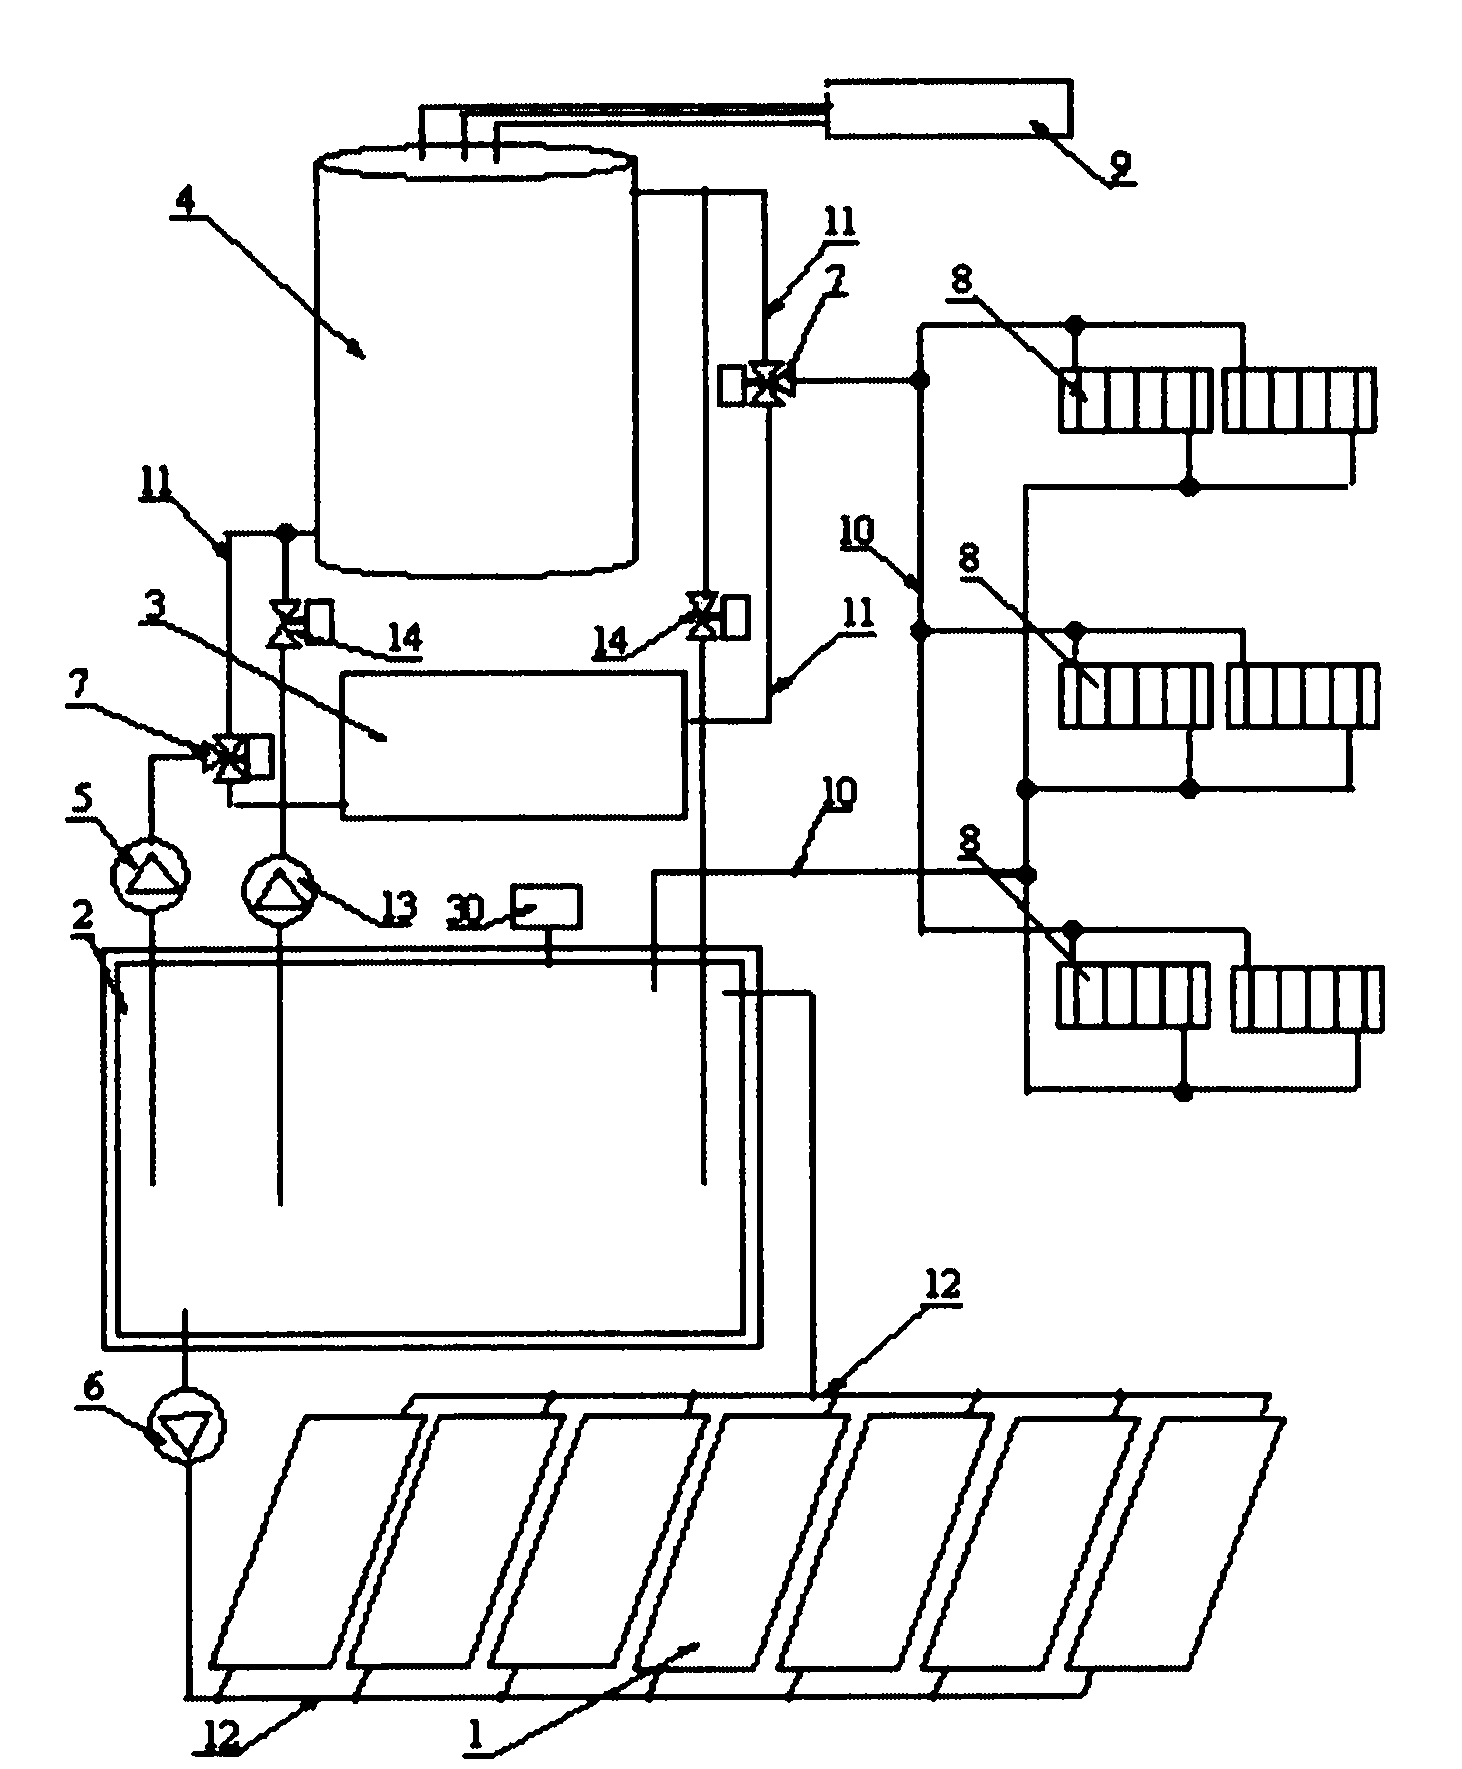 Heating system using solar energy and heat stored by fused salt